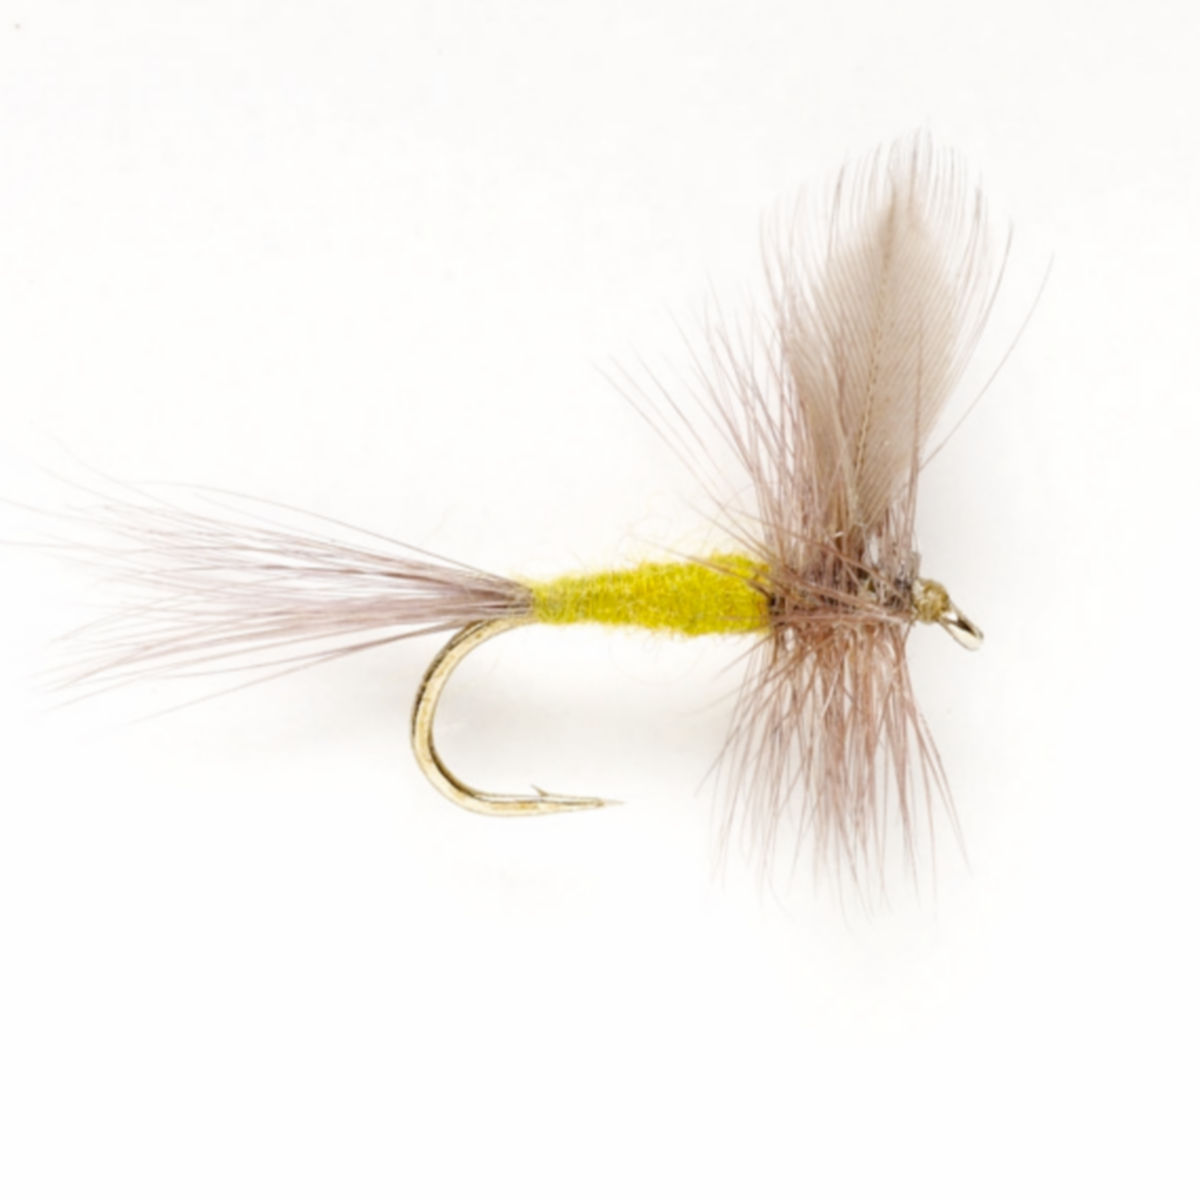 3 Blue Winged Olive Dry Trout Flies Fishing Flies Sizes 10 12 14 